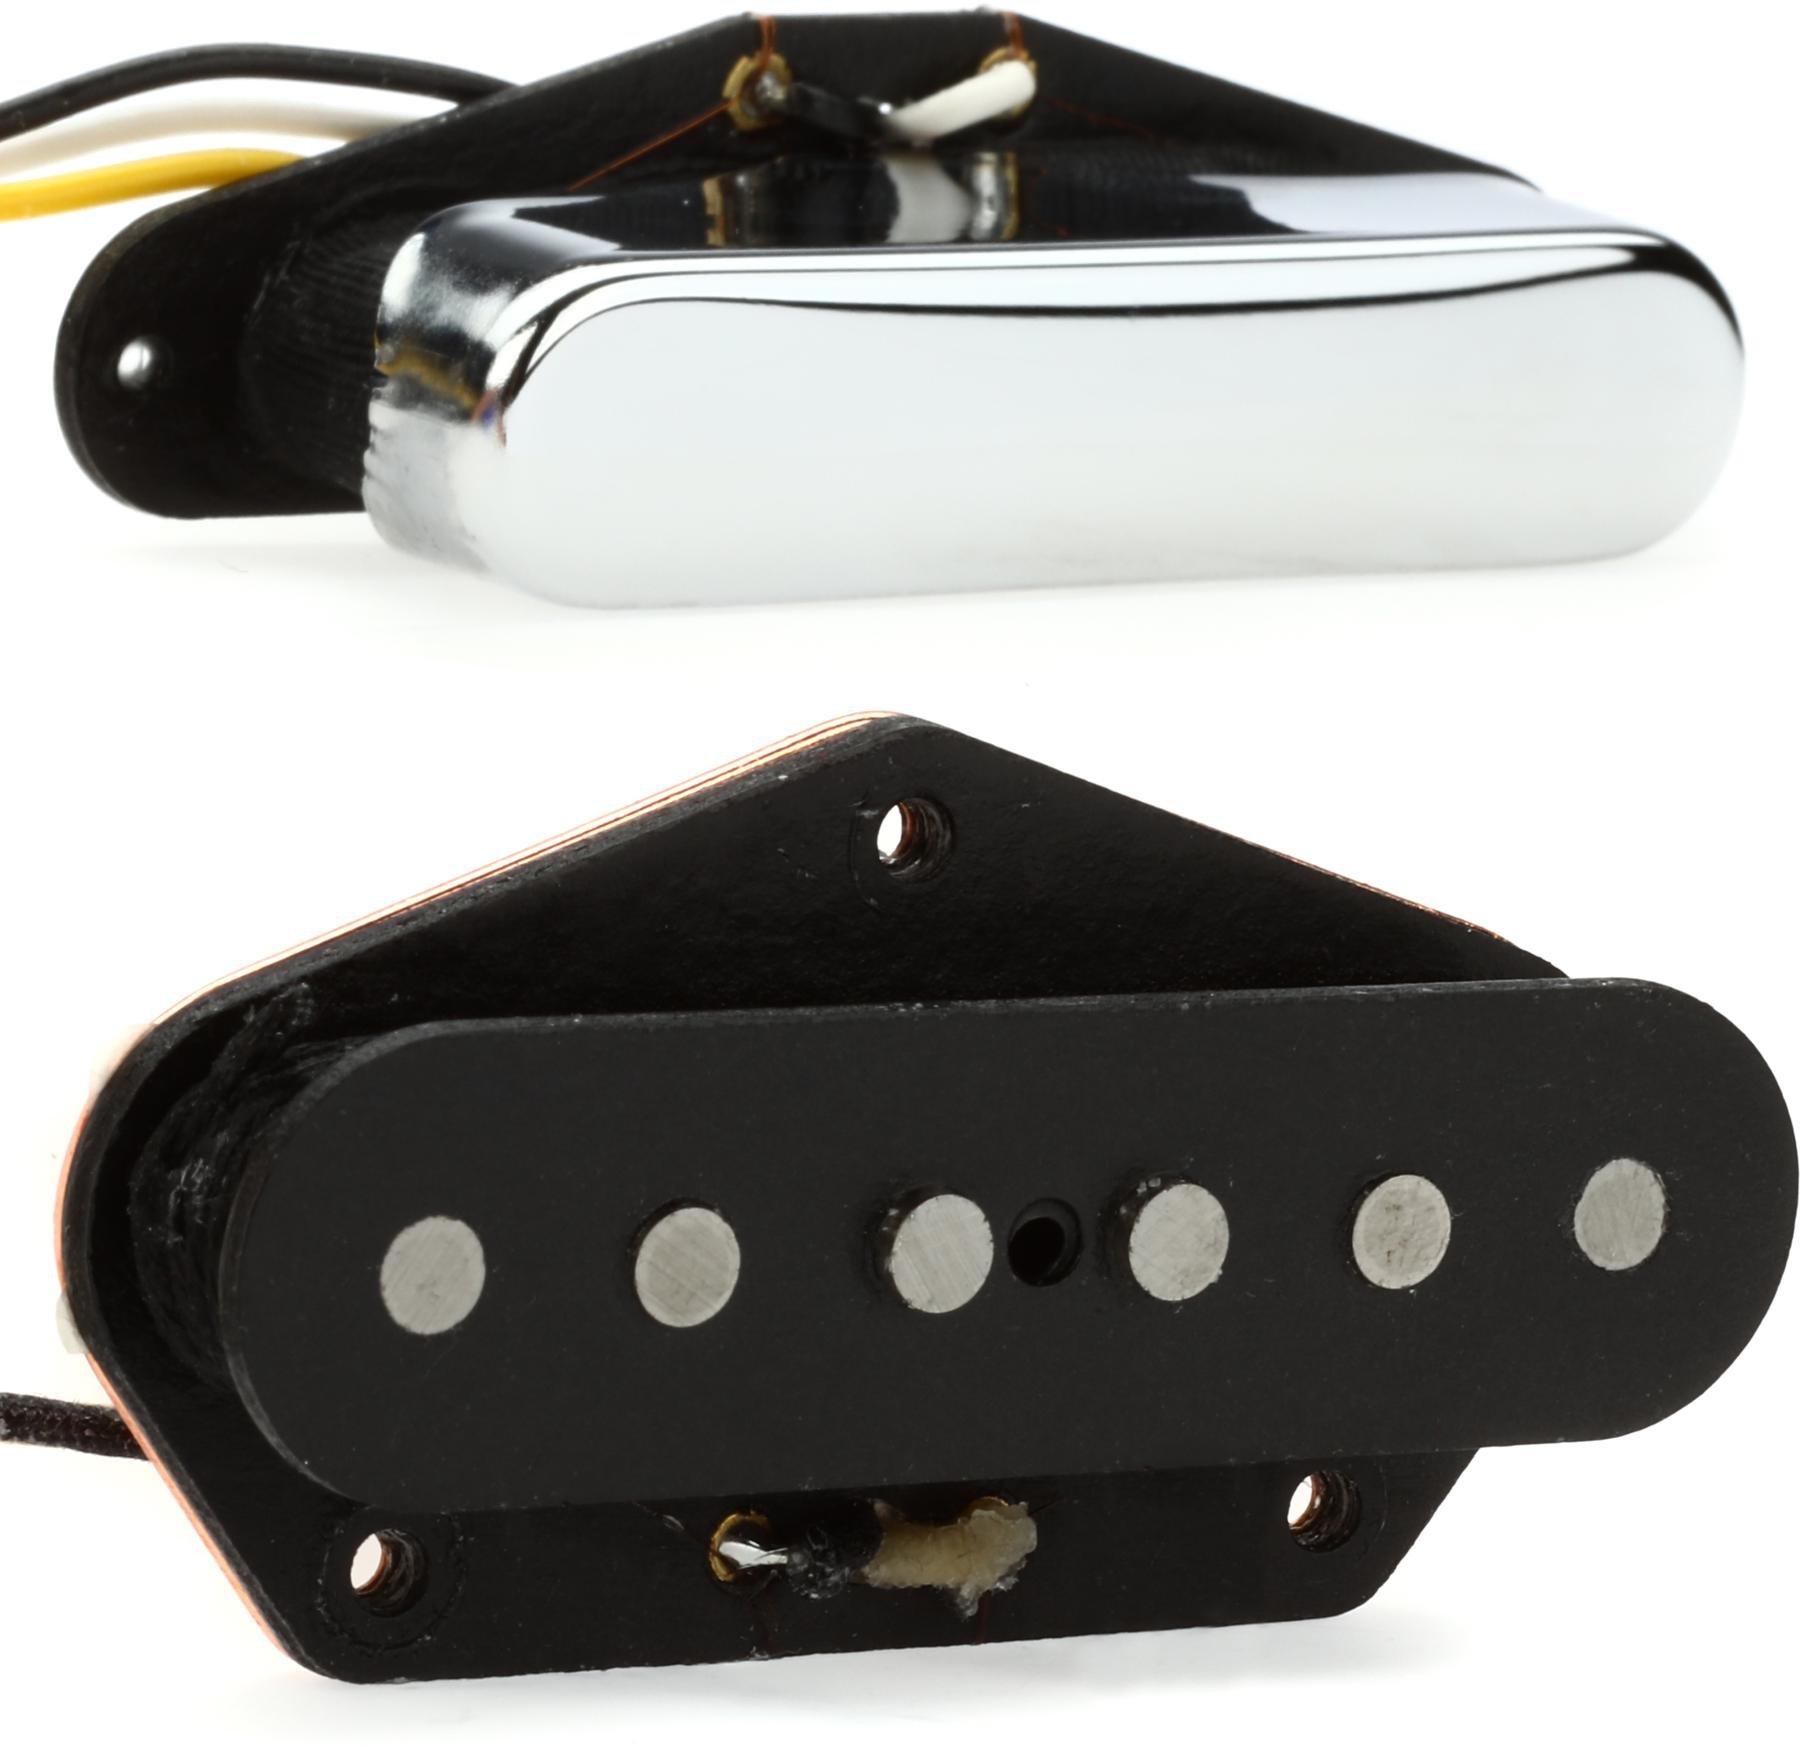 Fender Custom Shop Twisted Telecaster 2-piece Pickup Set | Sweetwater